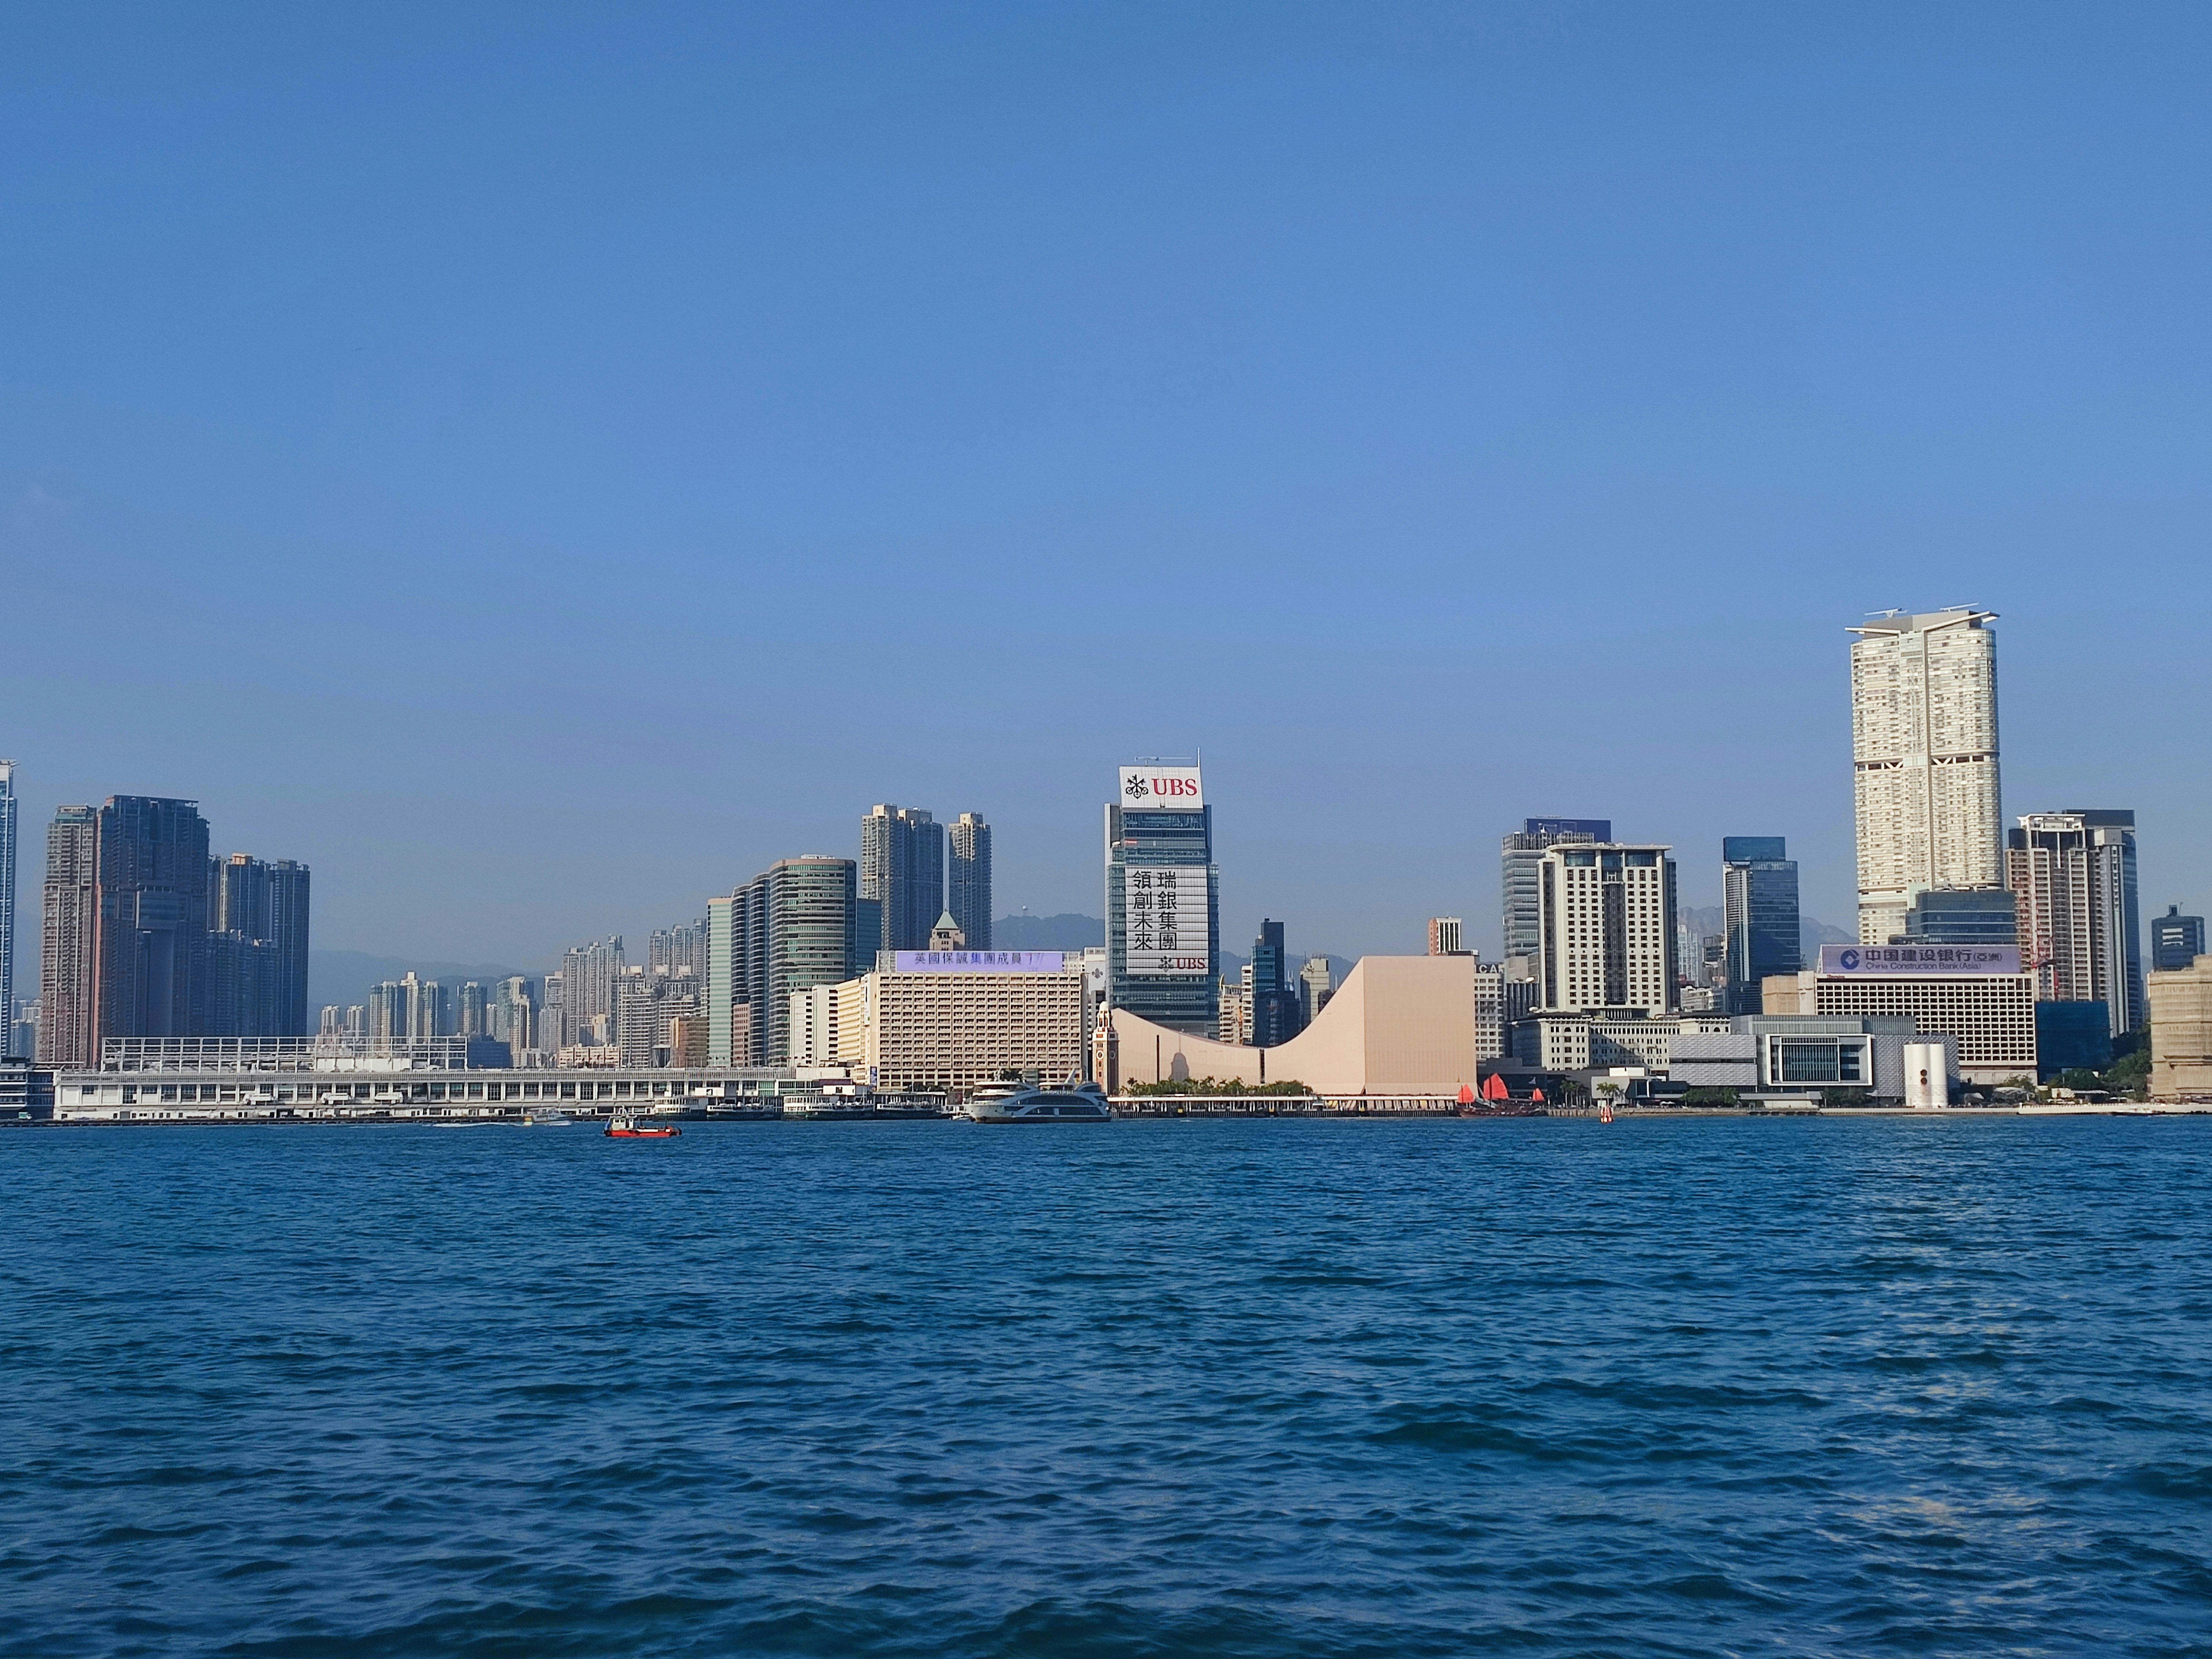 From left to right: Star Ferry Pier, Star House, Hong Kong Cultural Centre, Hong Kong Museum of Art. This is the tip of Kowloon Peninsula and coastline of the area called Tsim Sha Tsui. The skyscraper building on the right is a luxurious apartment building called The Masterpiece (Hong Kong).